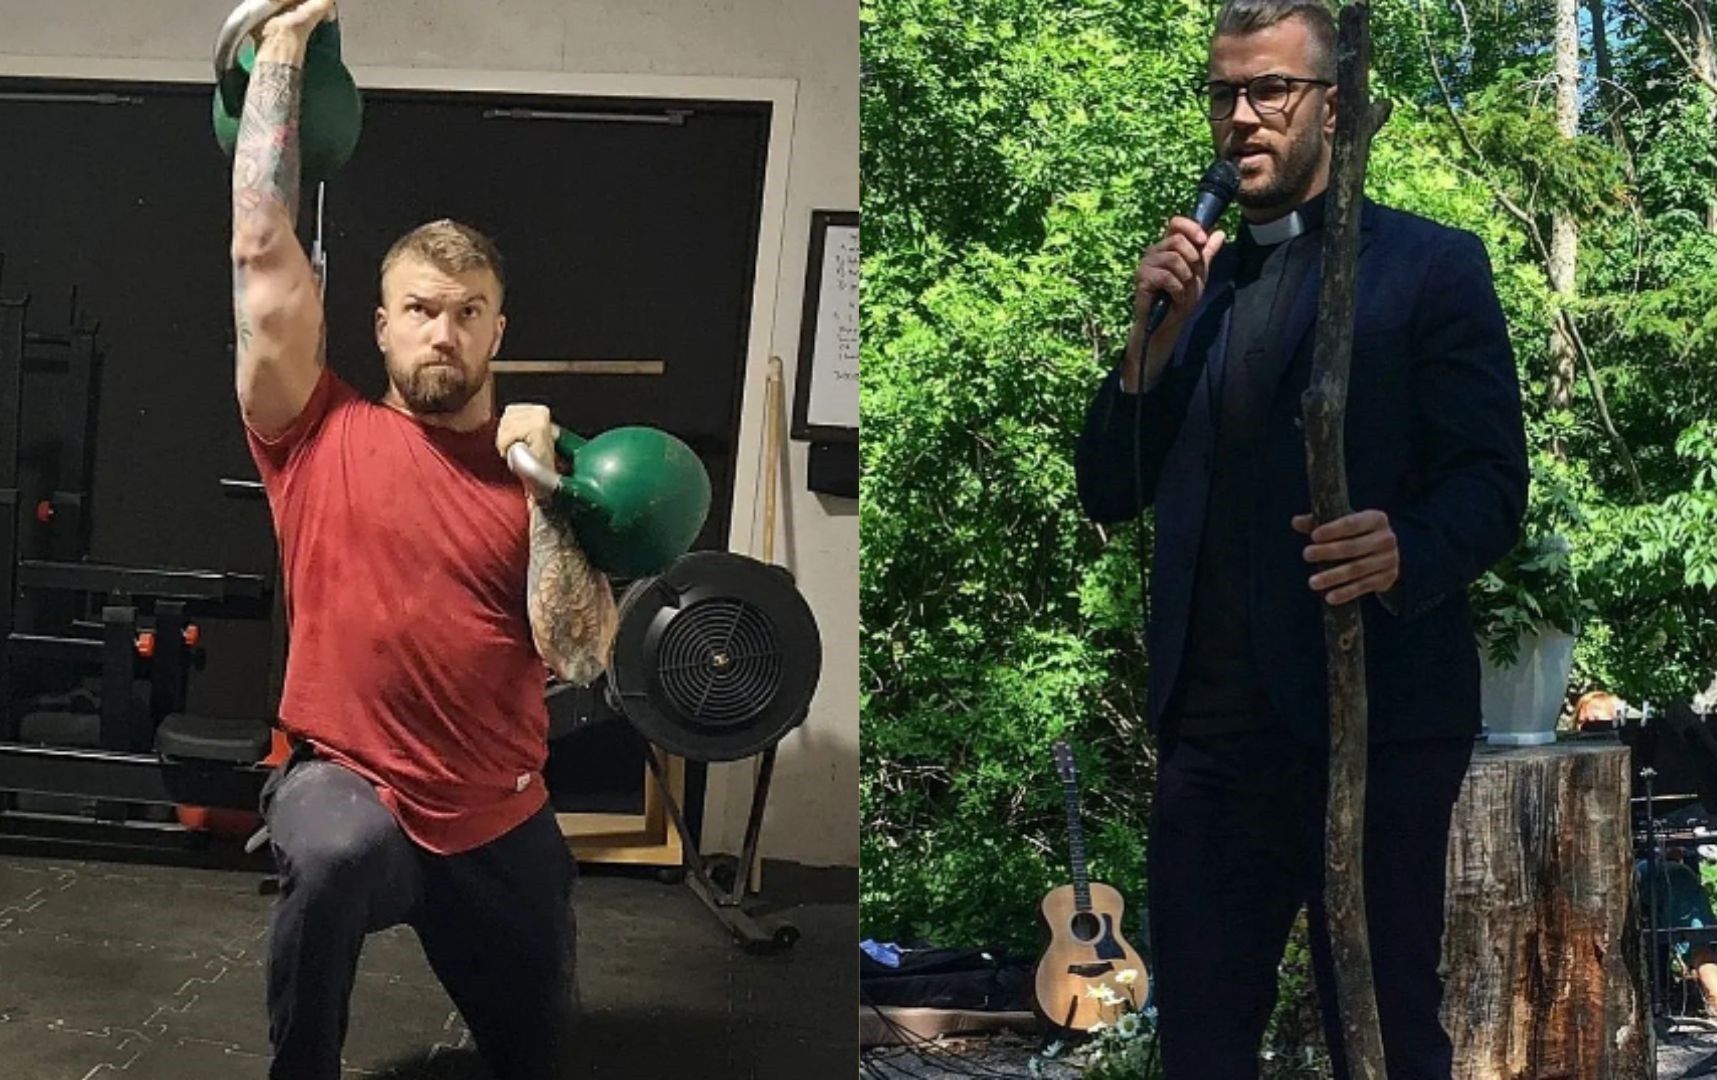 Sweden's 'crossfit priest' heals body and soul on Instagram